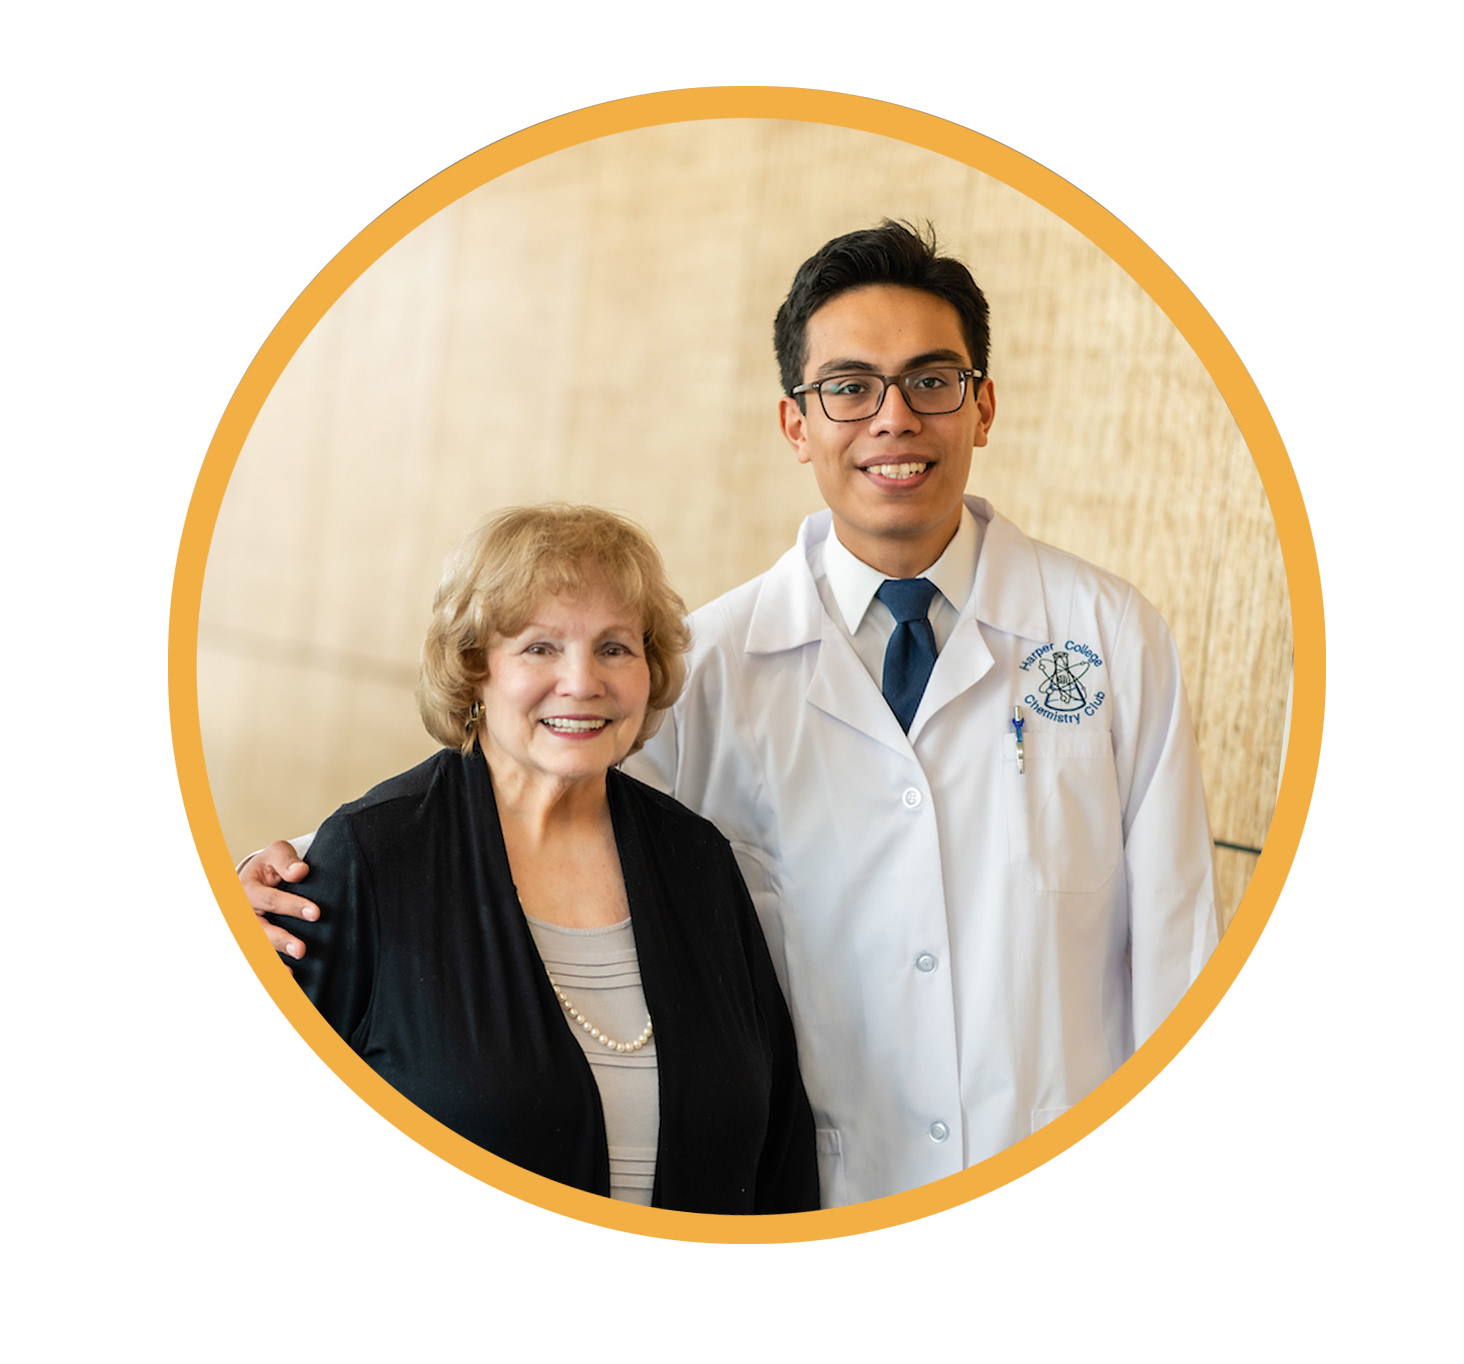 Diego C. with his scholarship donor Linda J. Lang portrait